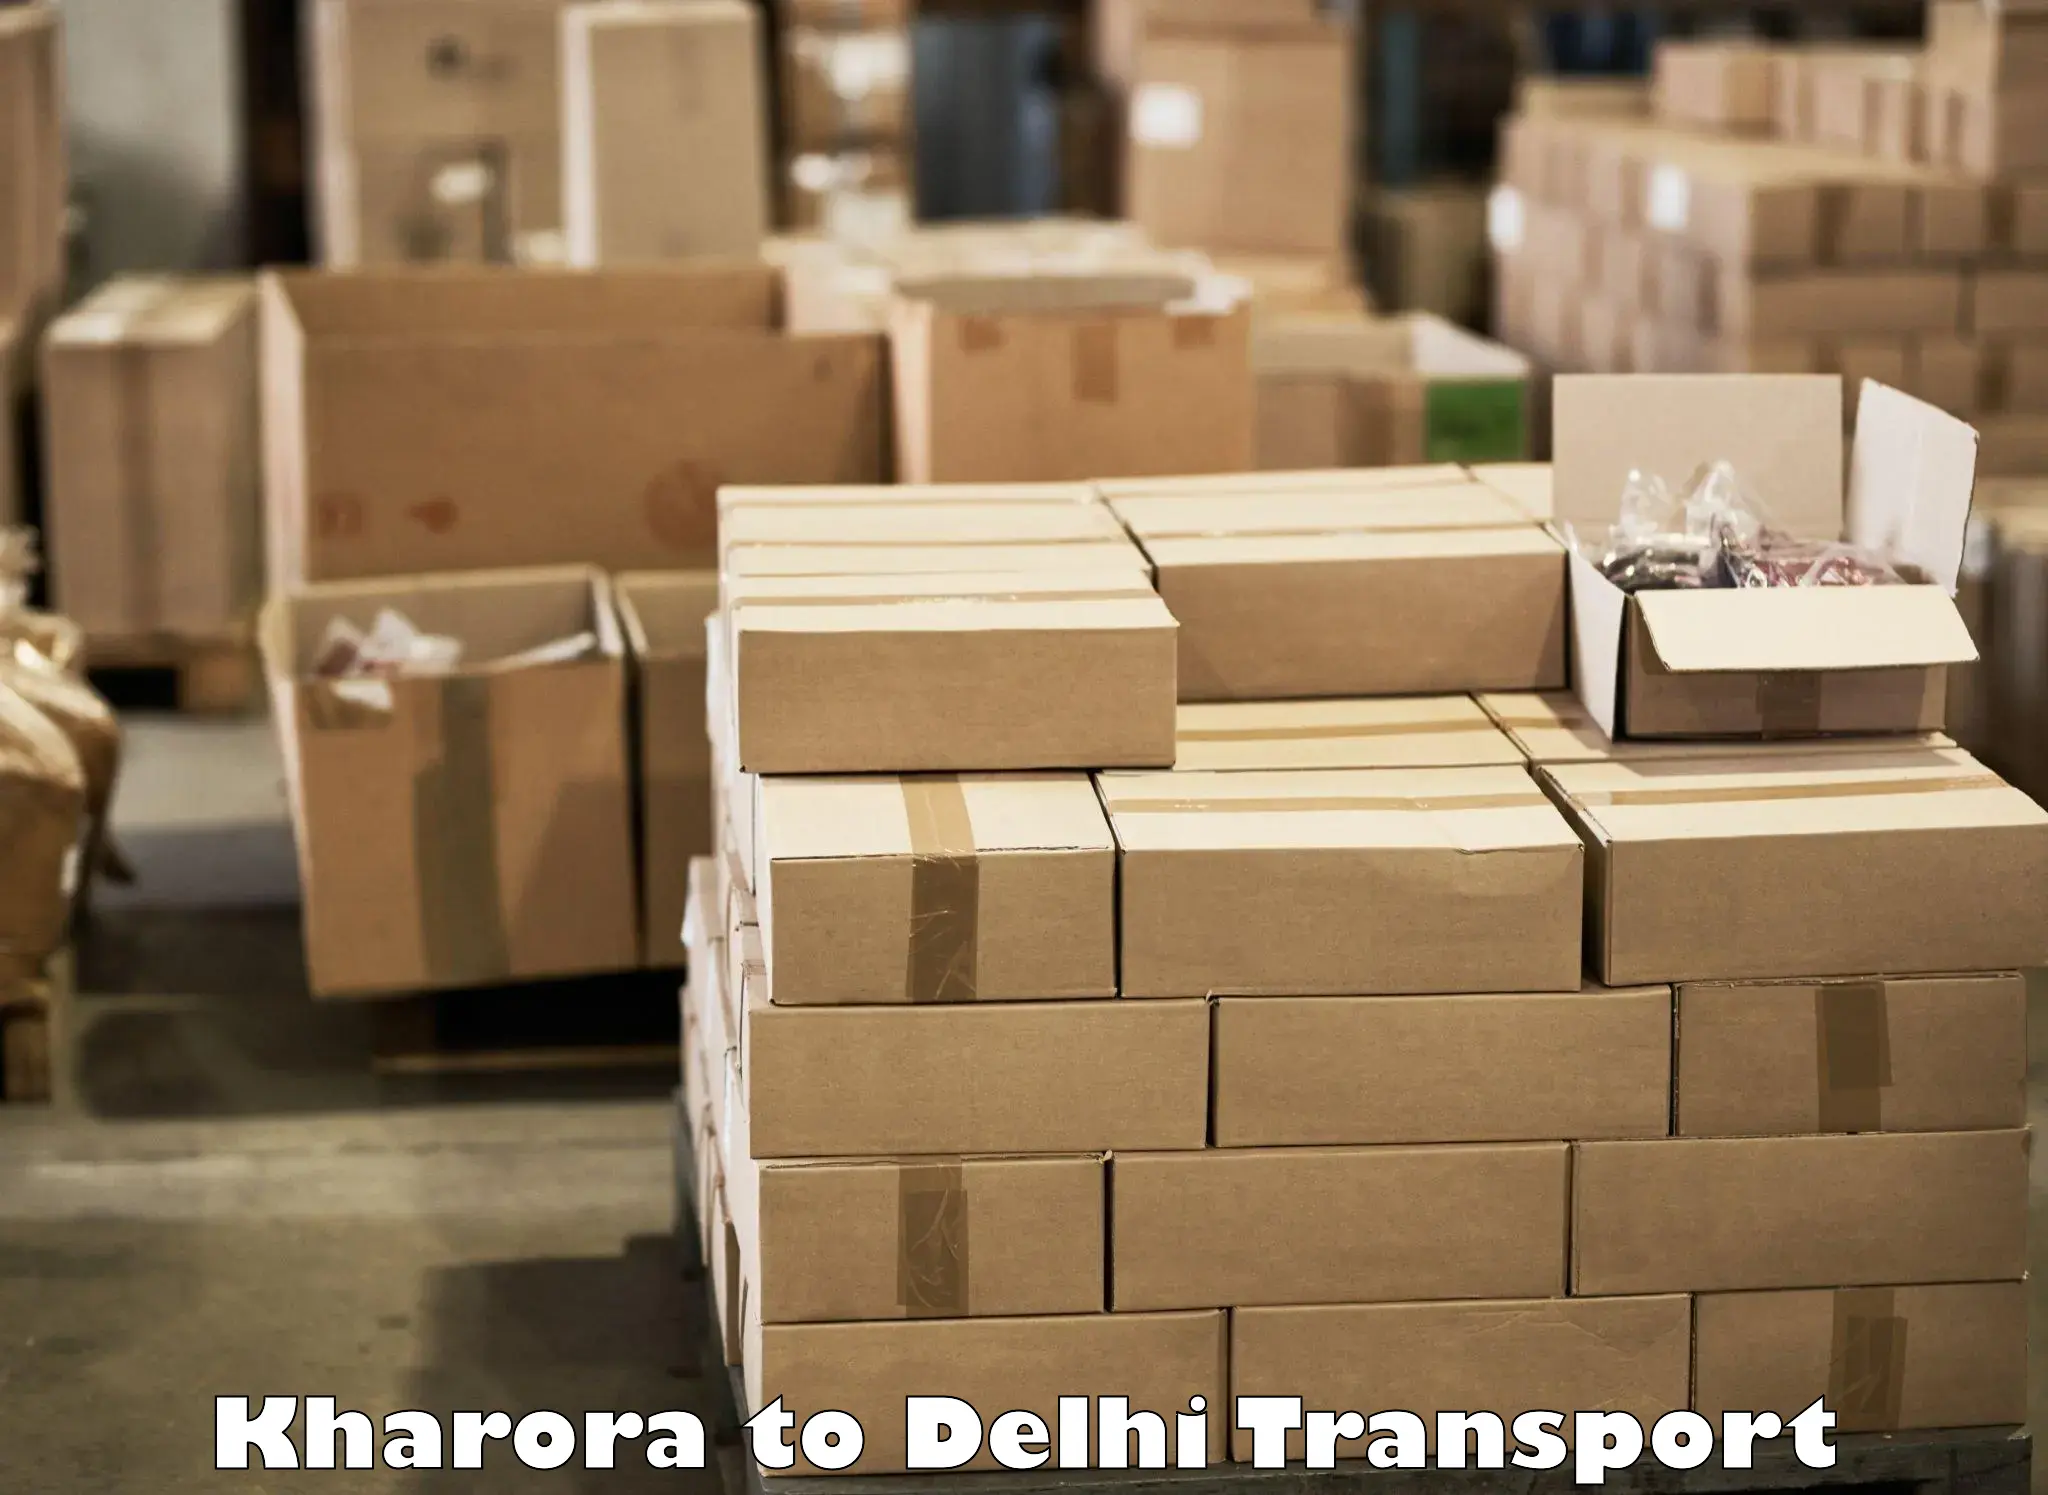 Commercial transport service Kharora to NCR